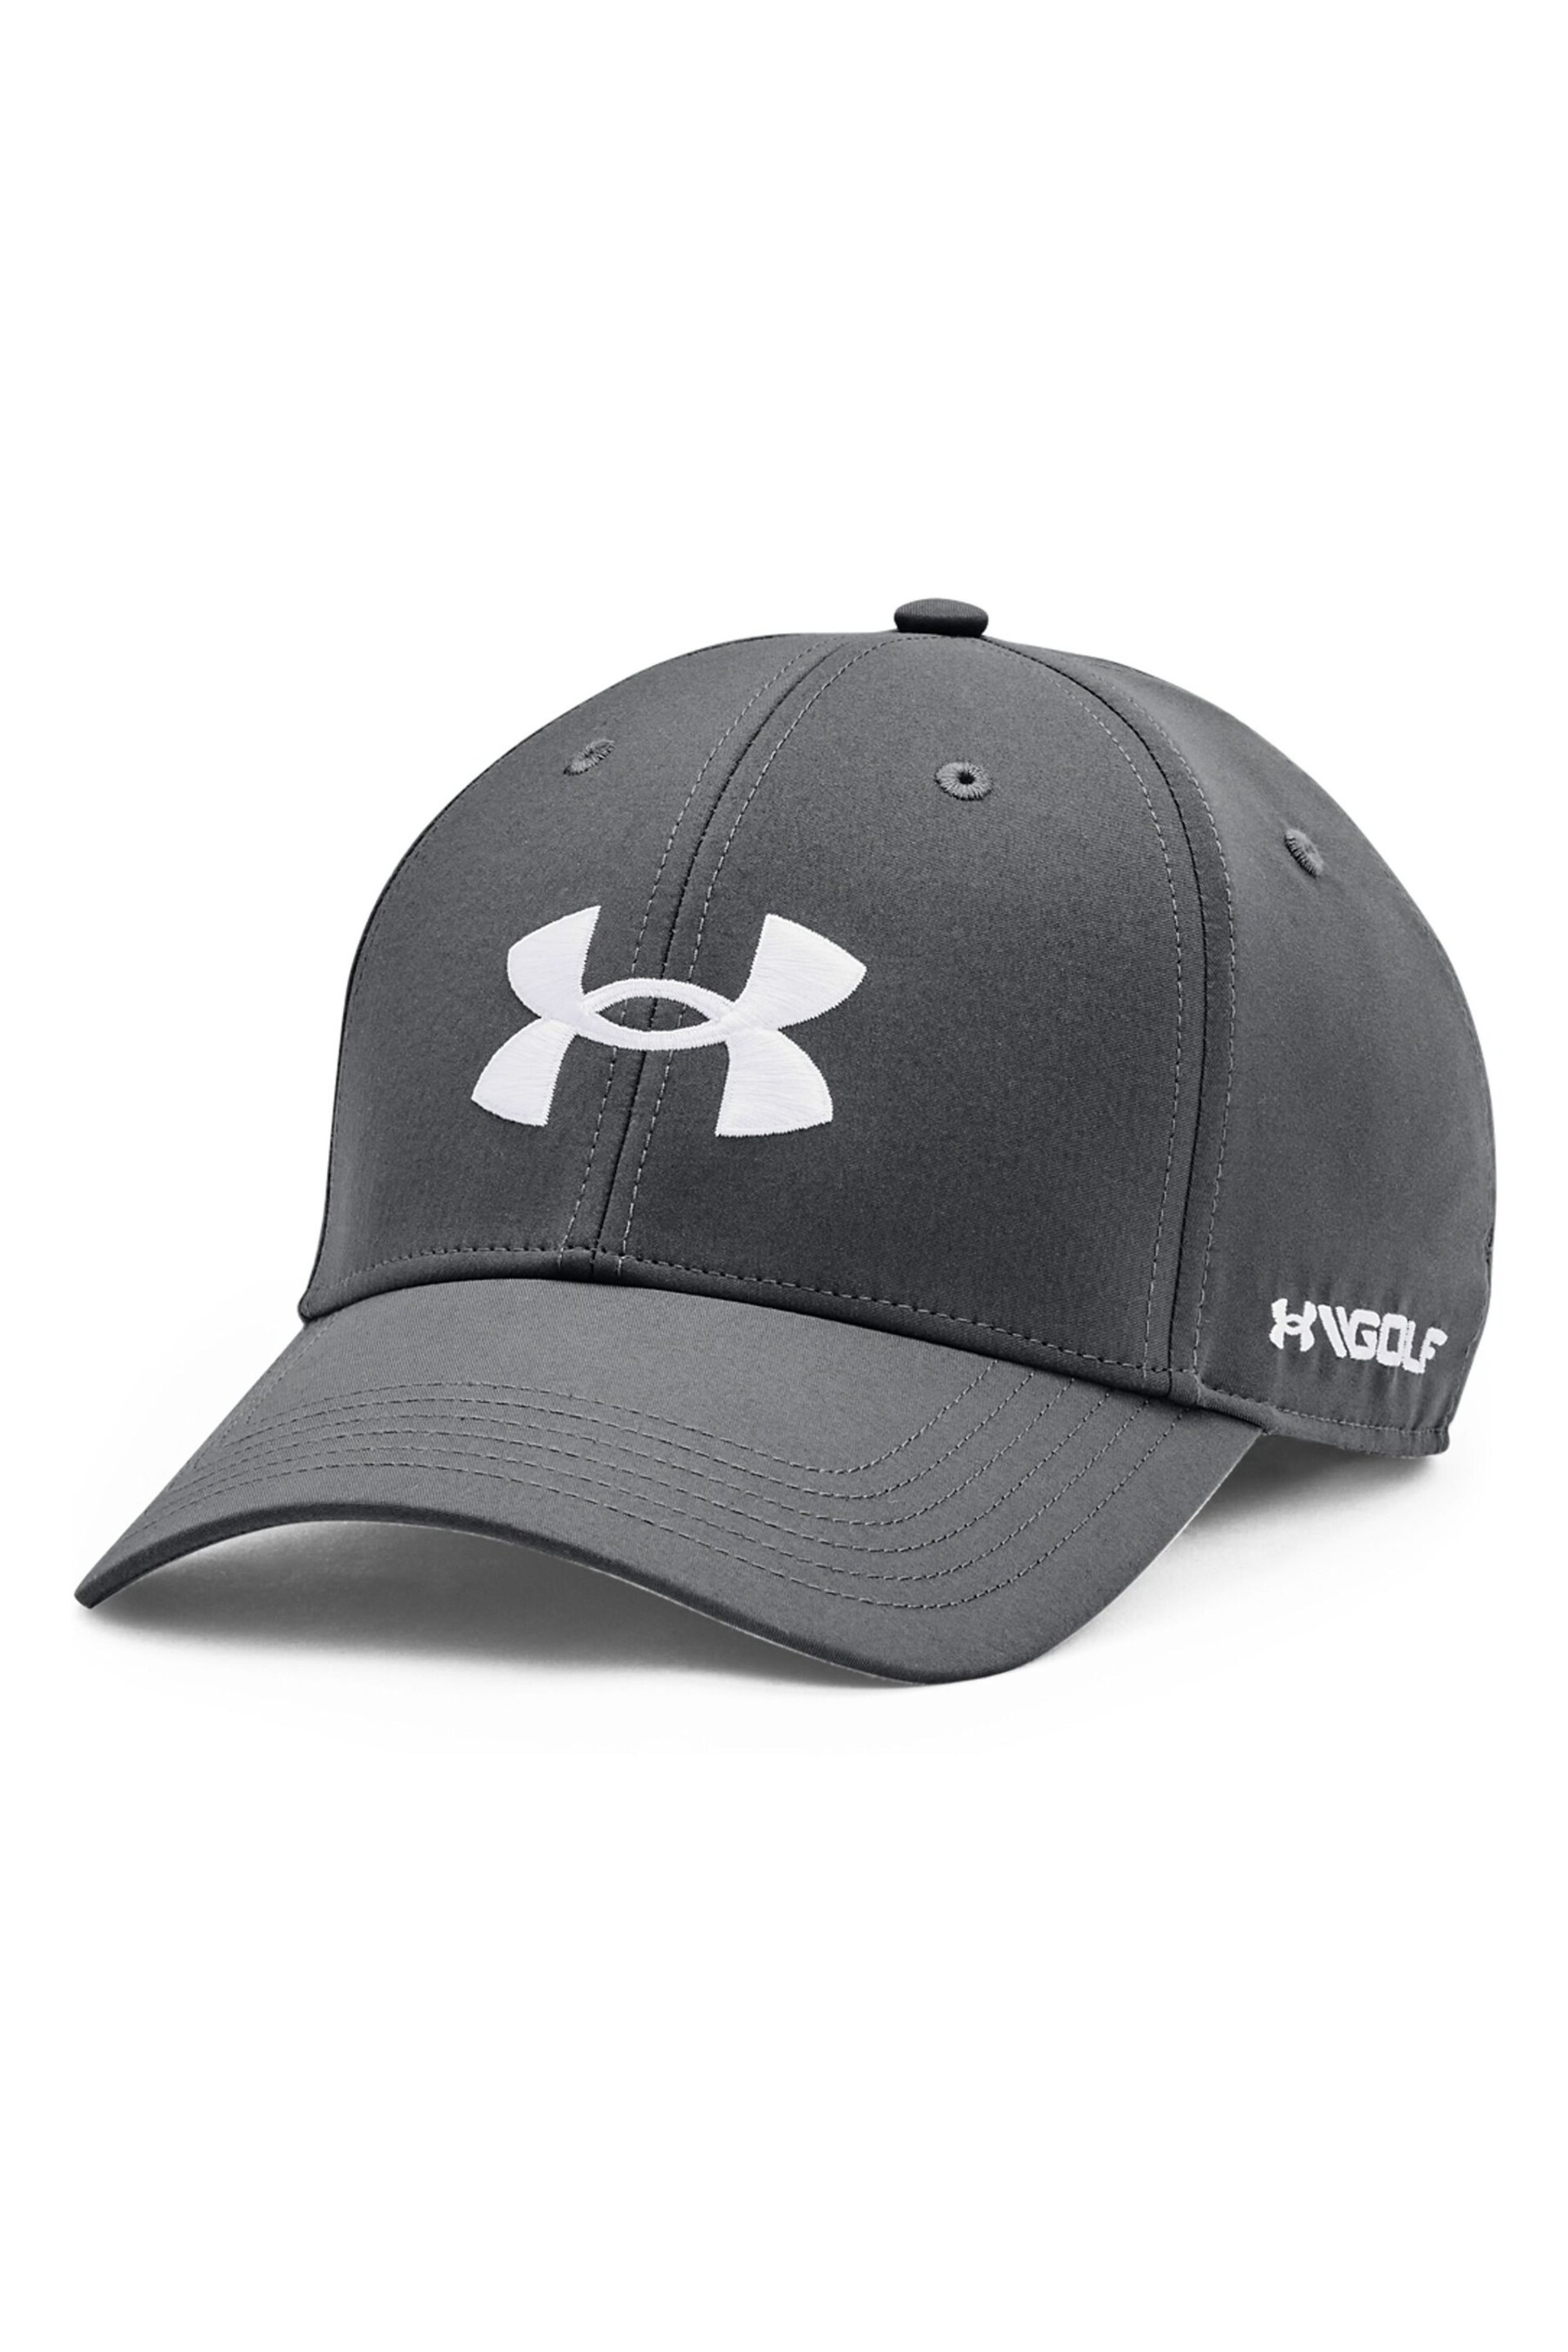 Under Armour Grey/White Golf 96 Cap - Image 2 of 3